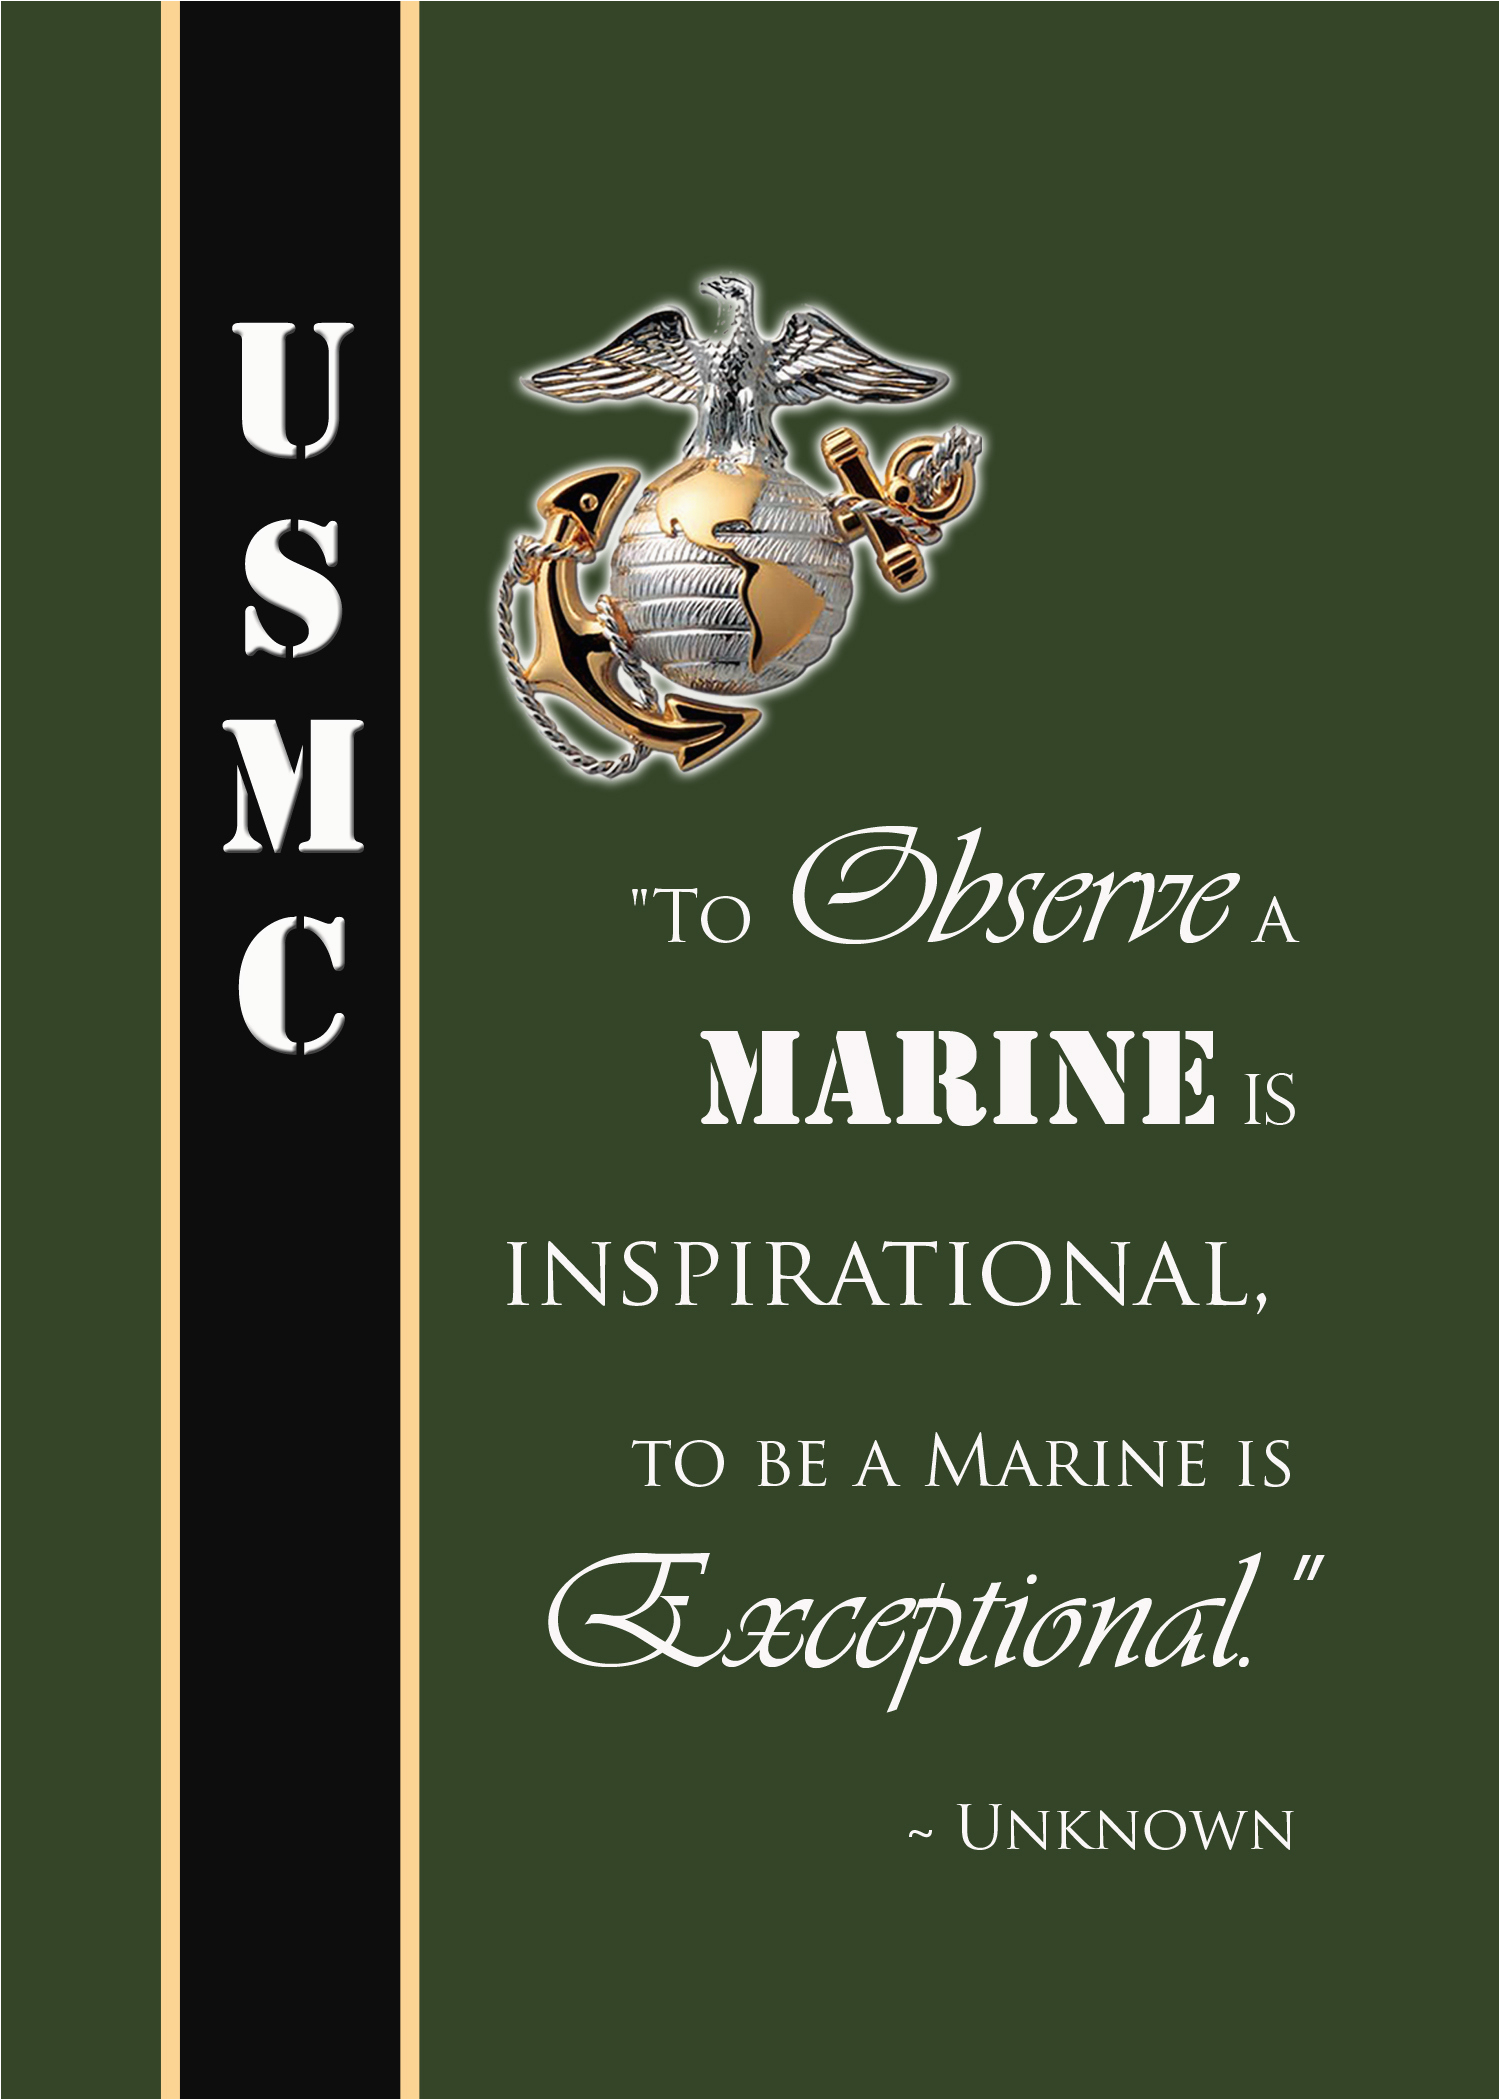 most famous marine quotes